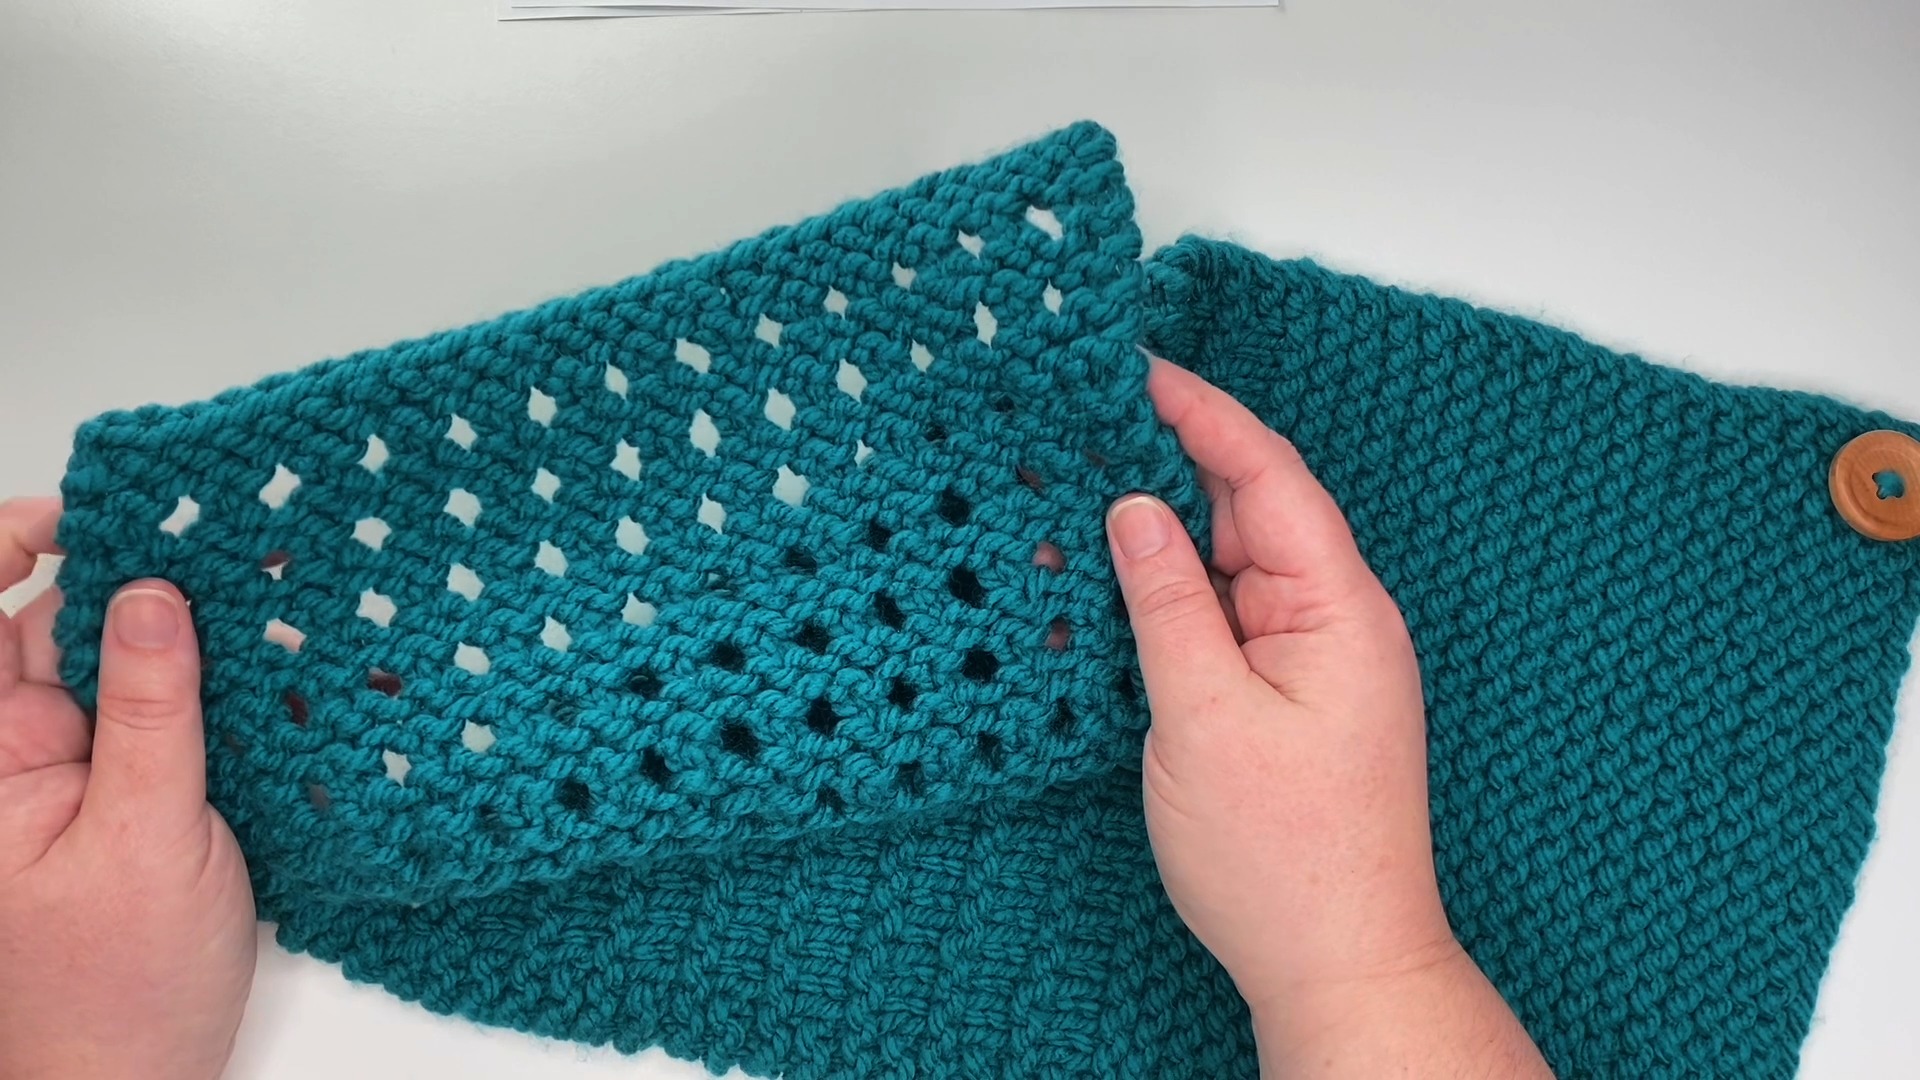 14-Day Learn to Knit Series: Day 13